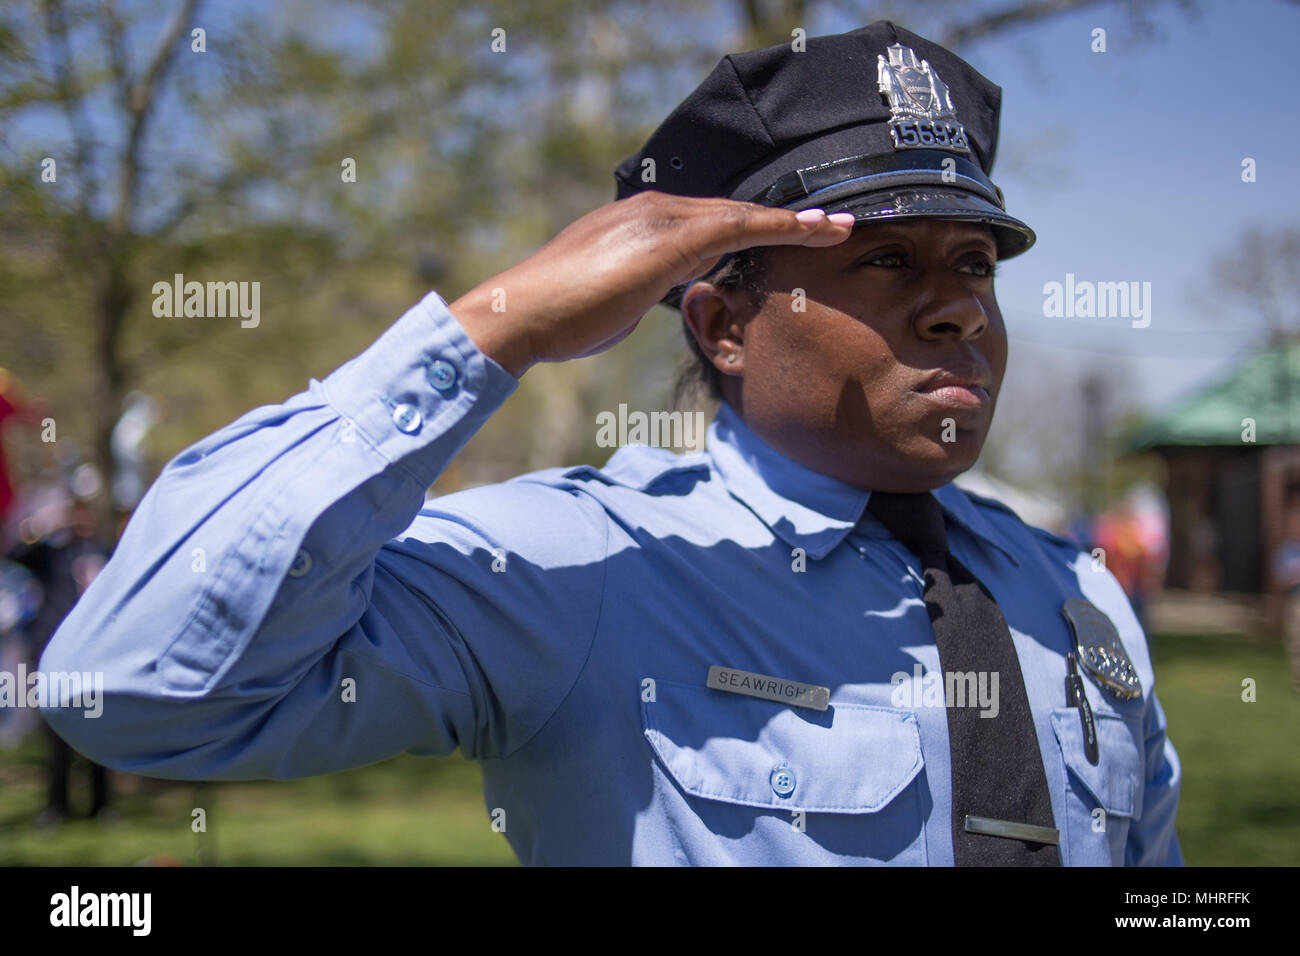 Philadelphia, USA. 2nd May 2018. Police, firefighters, friends and families of fallen first responders attend the annual Living Flame memorial service to honor those lost on duty in the city. Credit: Michael Candelori/Alamy Live News Stock Photo